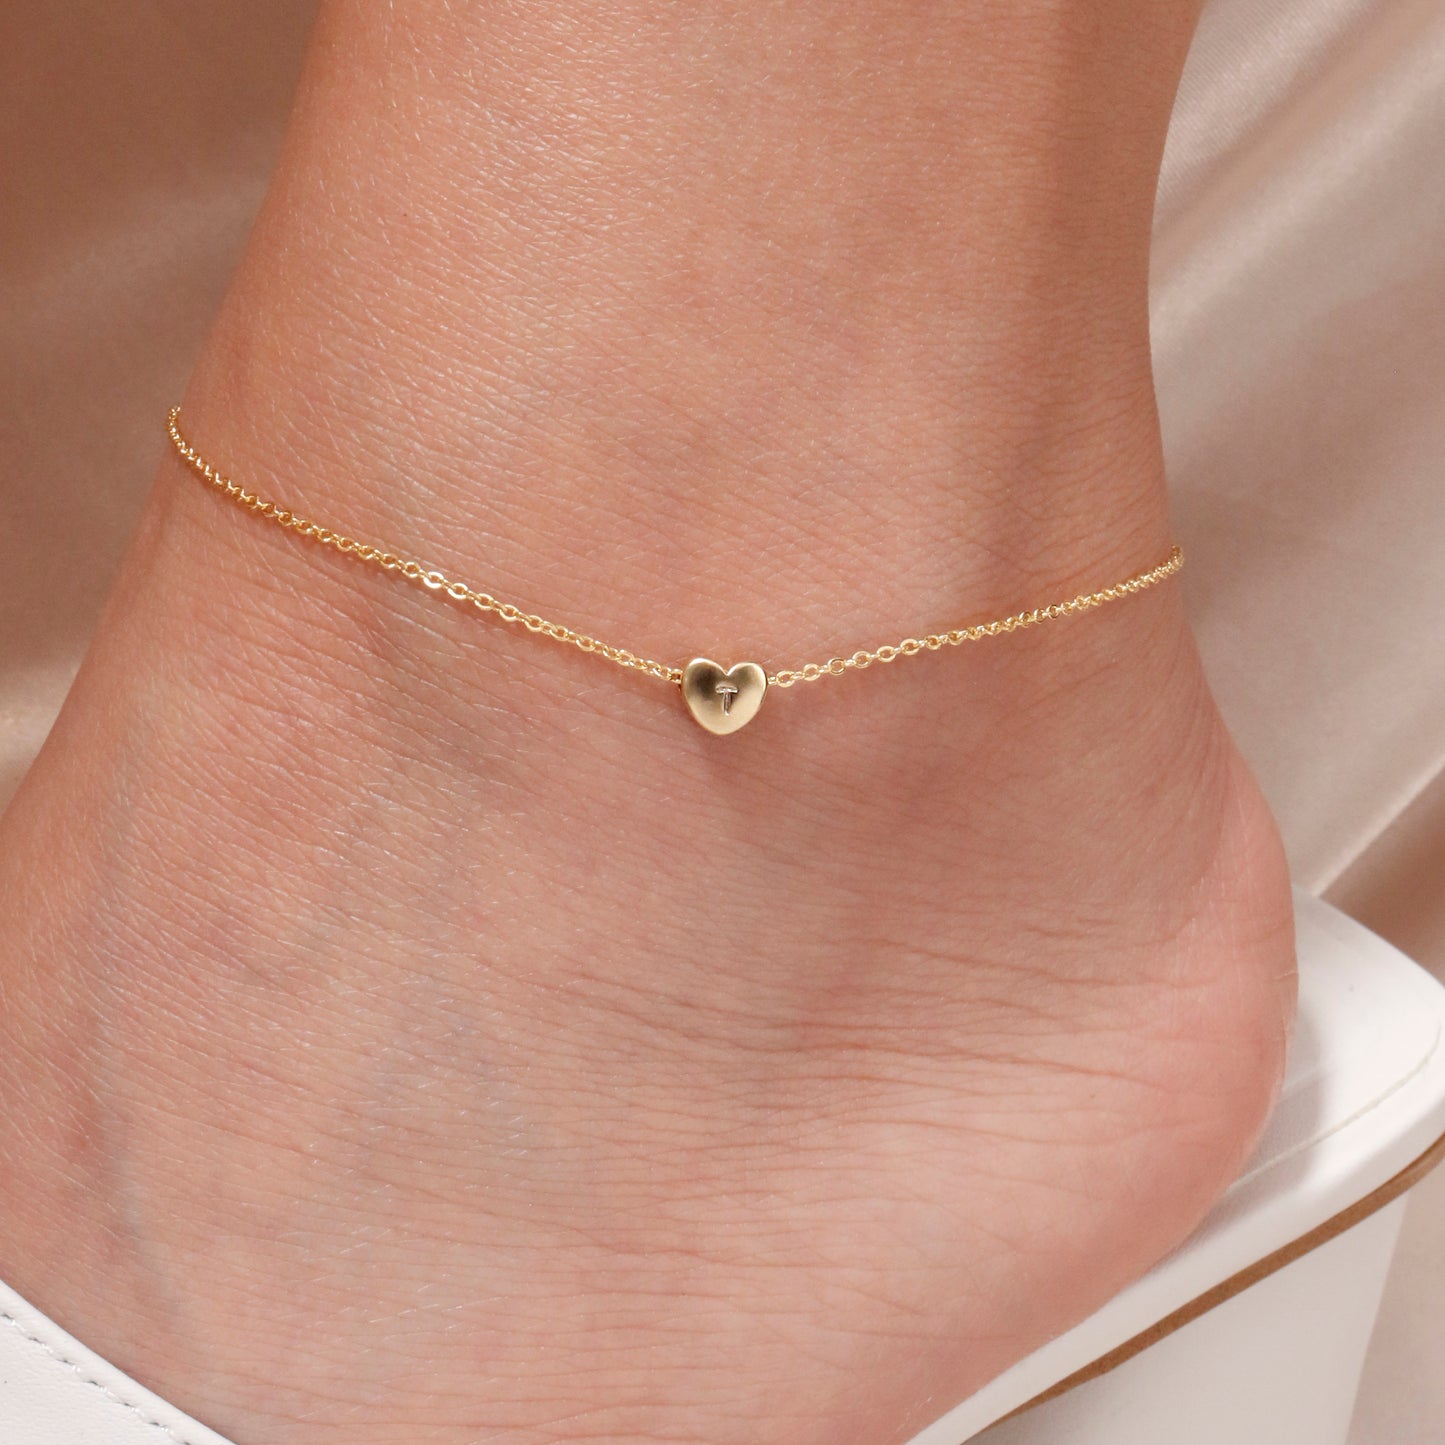 Tiny heart initial Anklet dainty ankle bracelets delicate anklets bridesmaid gift simple gold bracelet